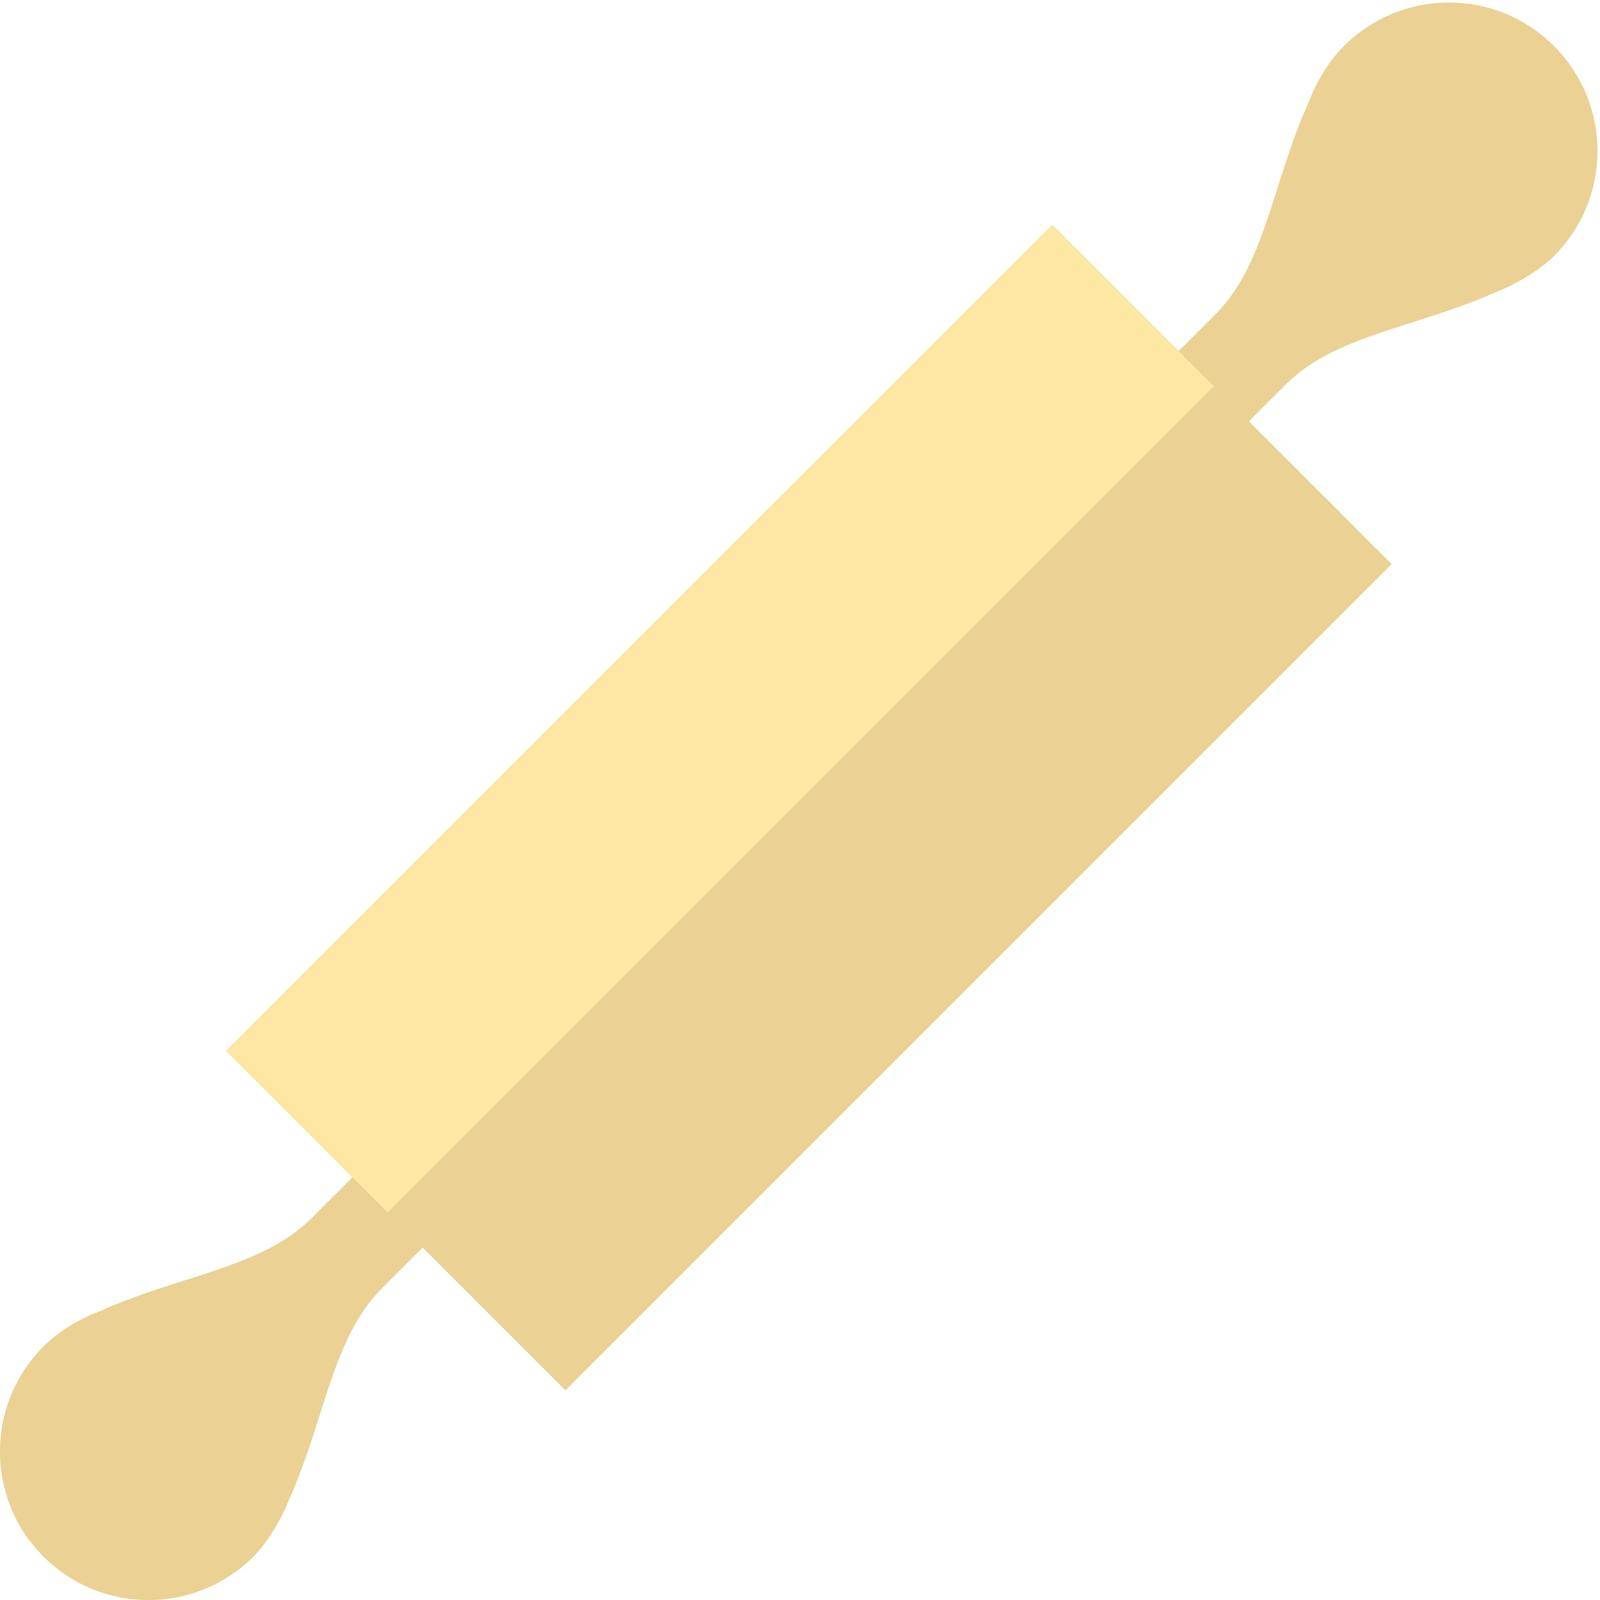 Flat icon - Wooden roller by puruan